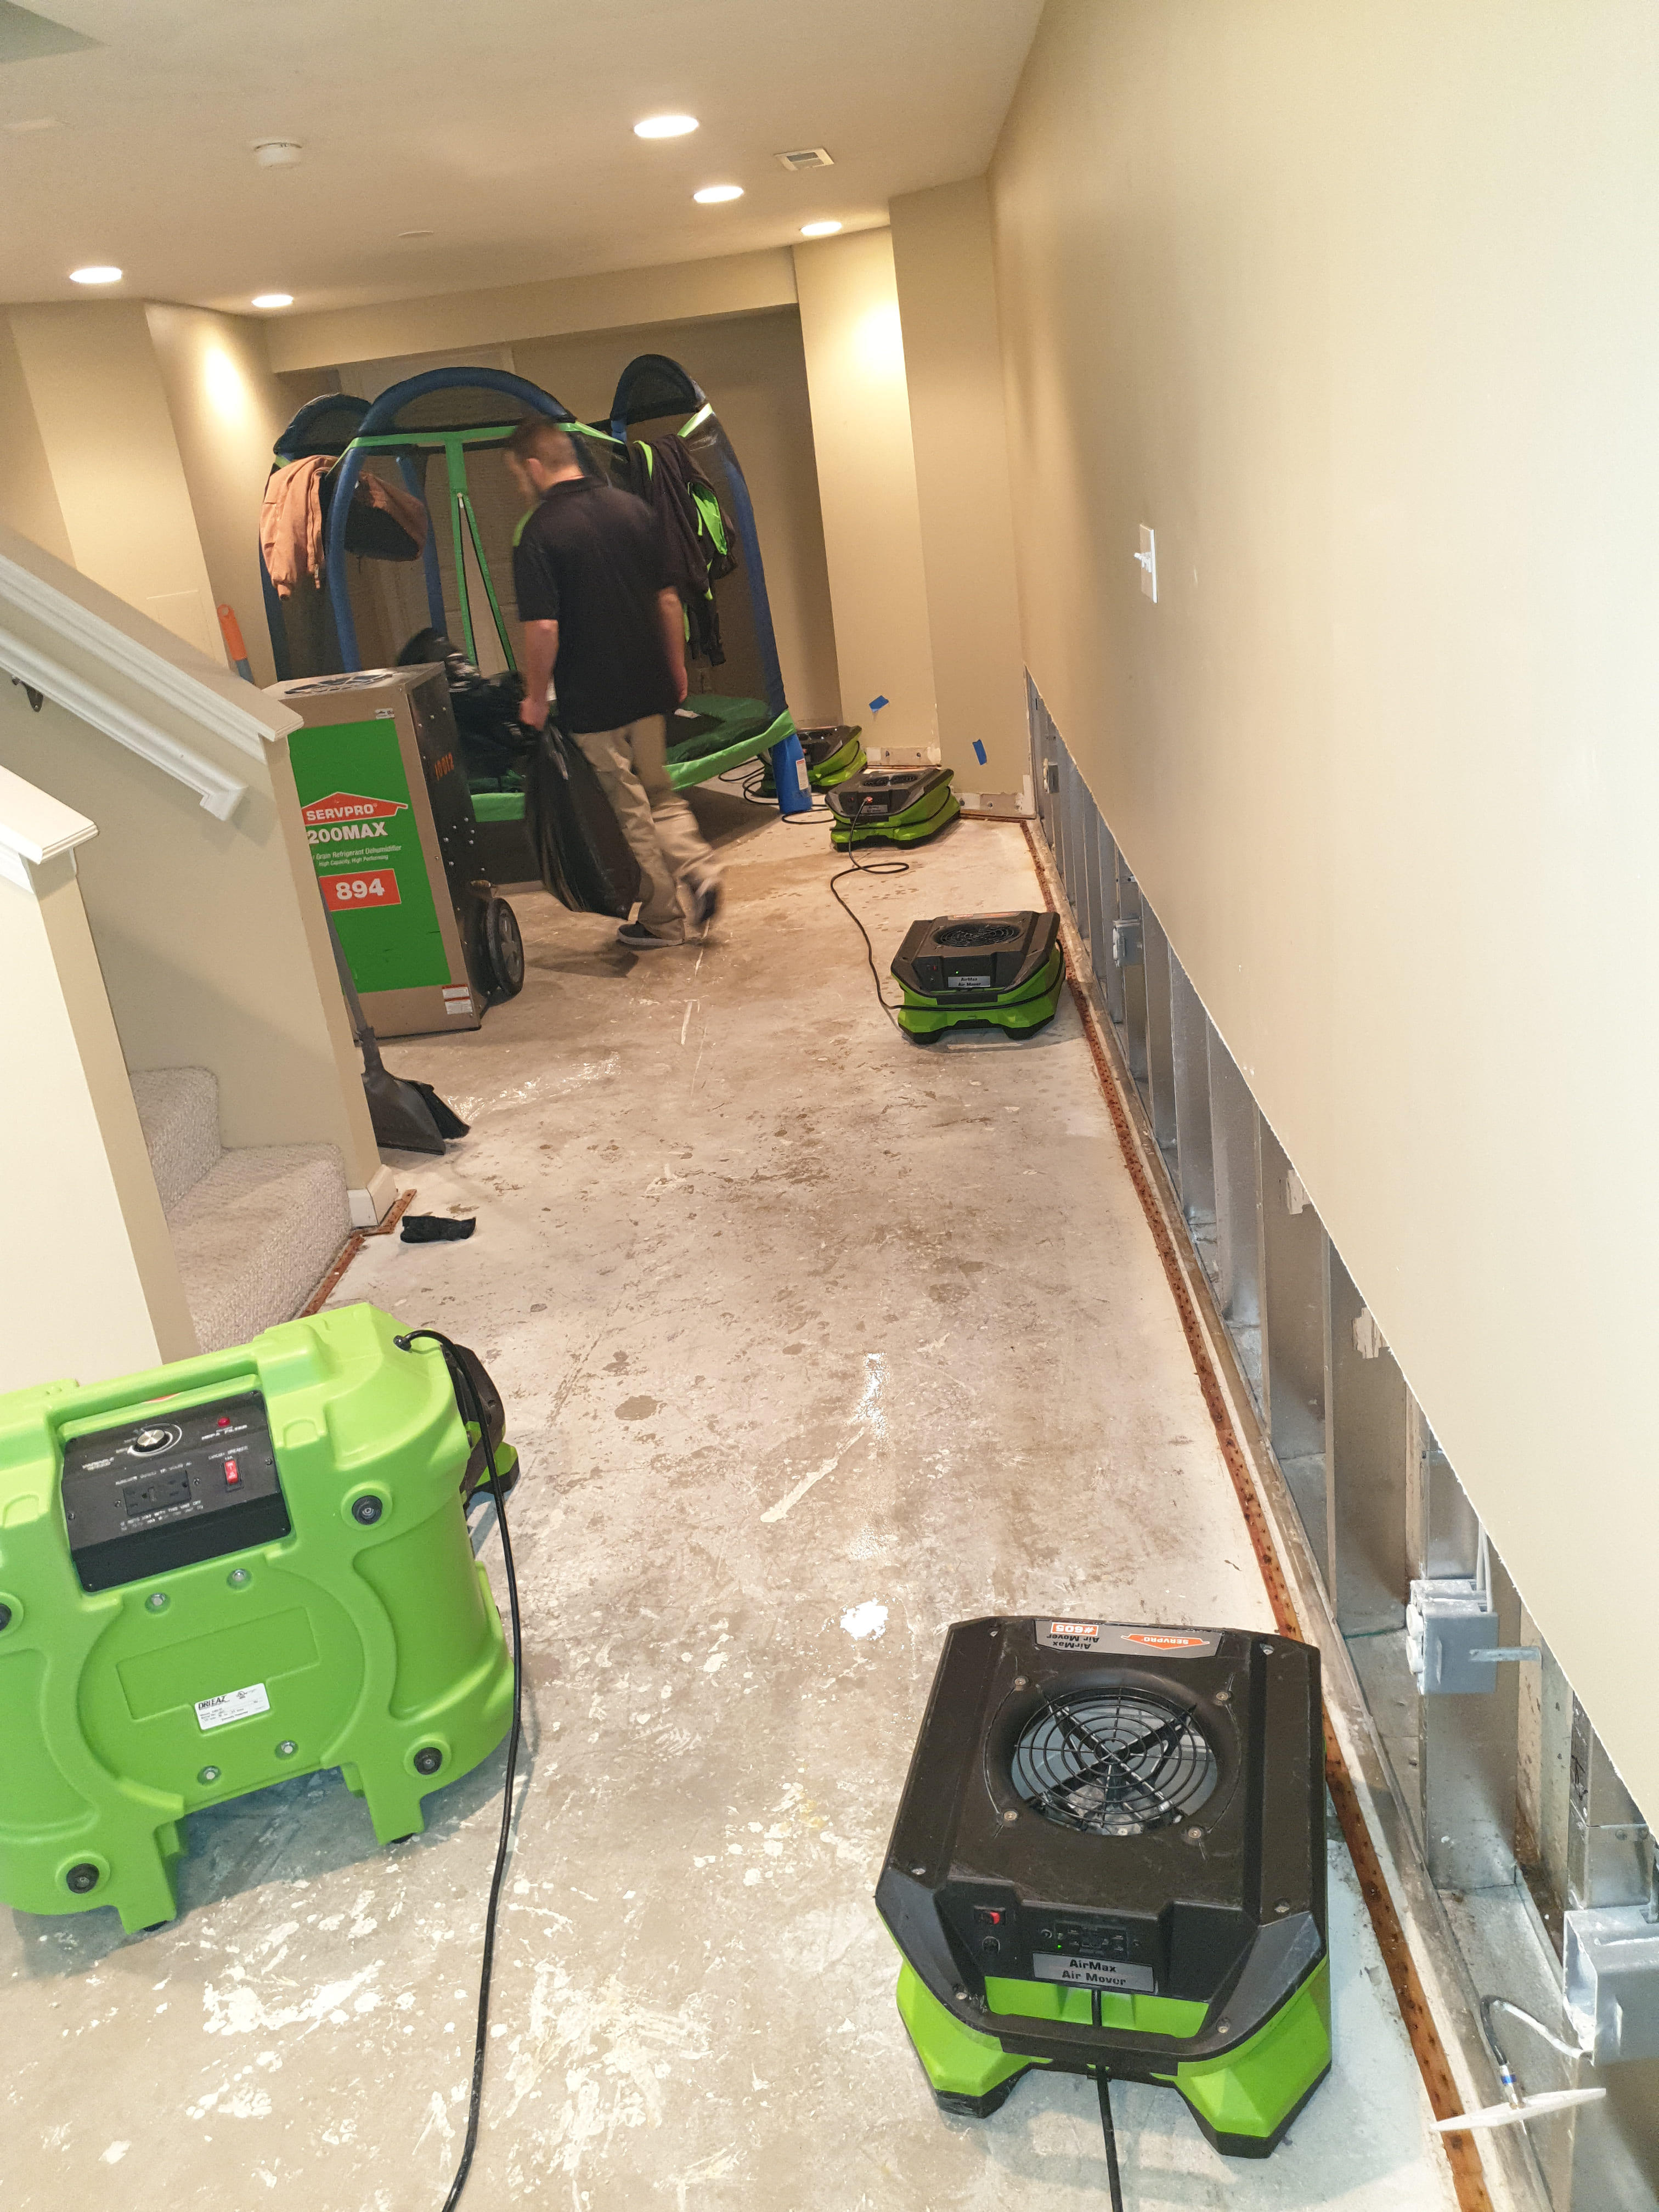 Water damage cannot withstand our prompt response and superior drying procedures. SERVPRO of Affton/ Webster Grove is here!